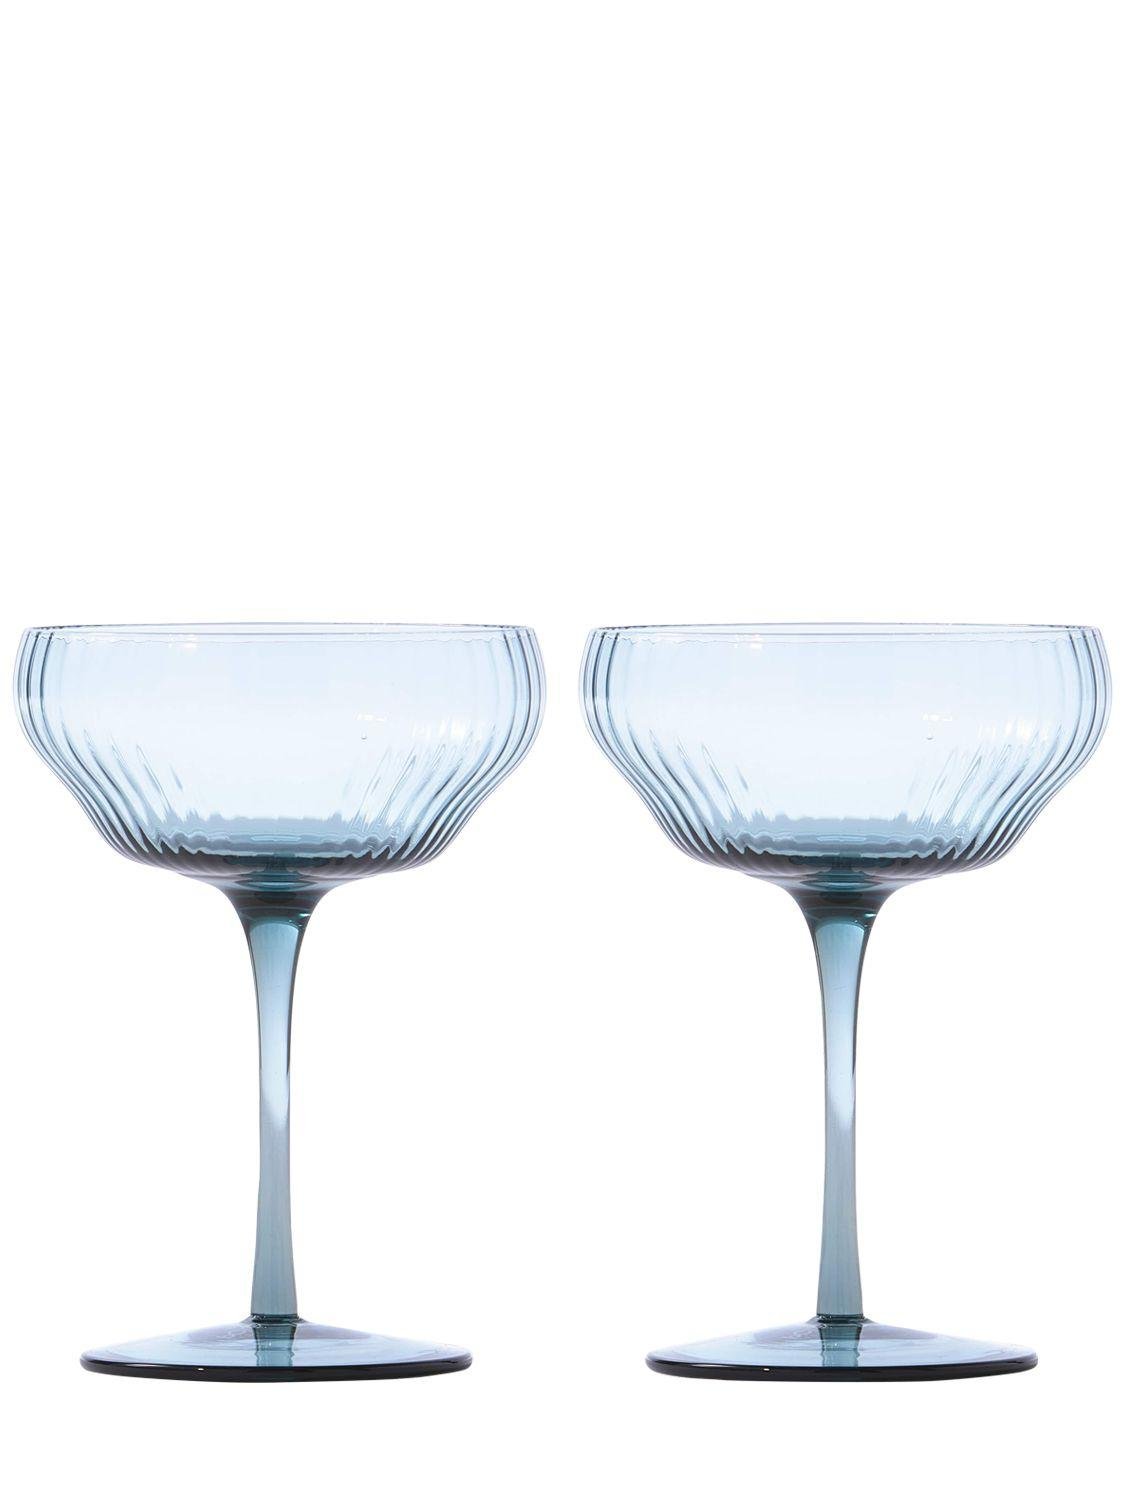 Set Of 2 Pum Coupes by POLSPOTTEN